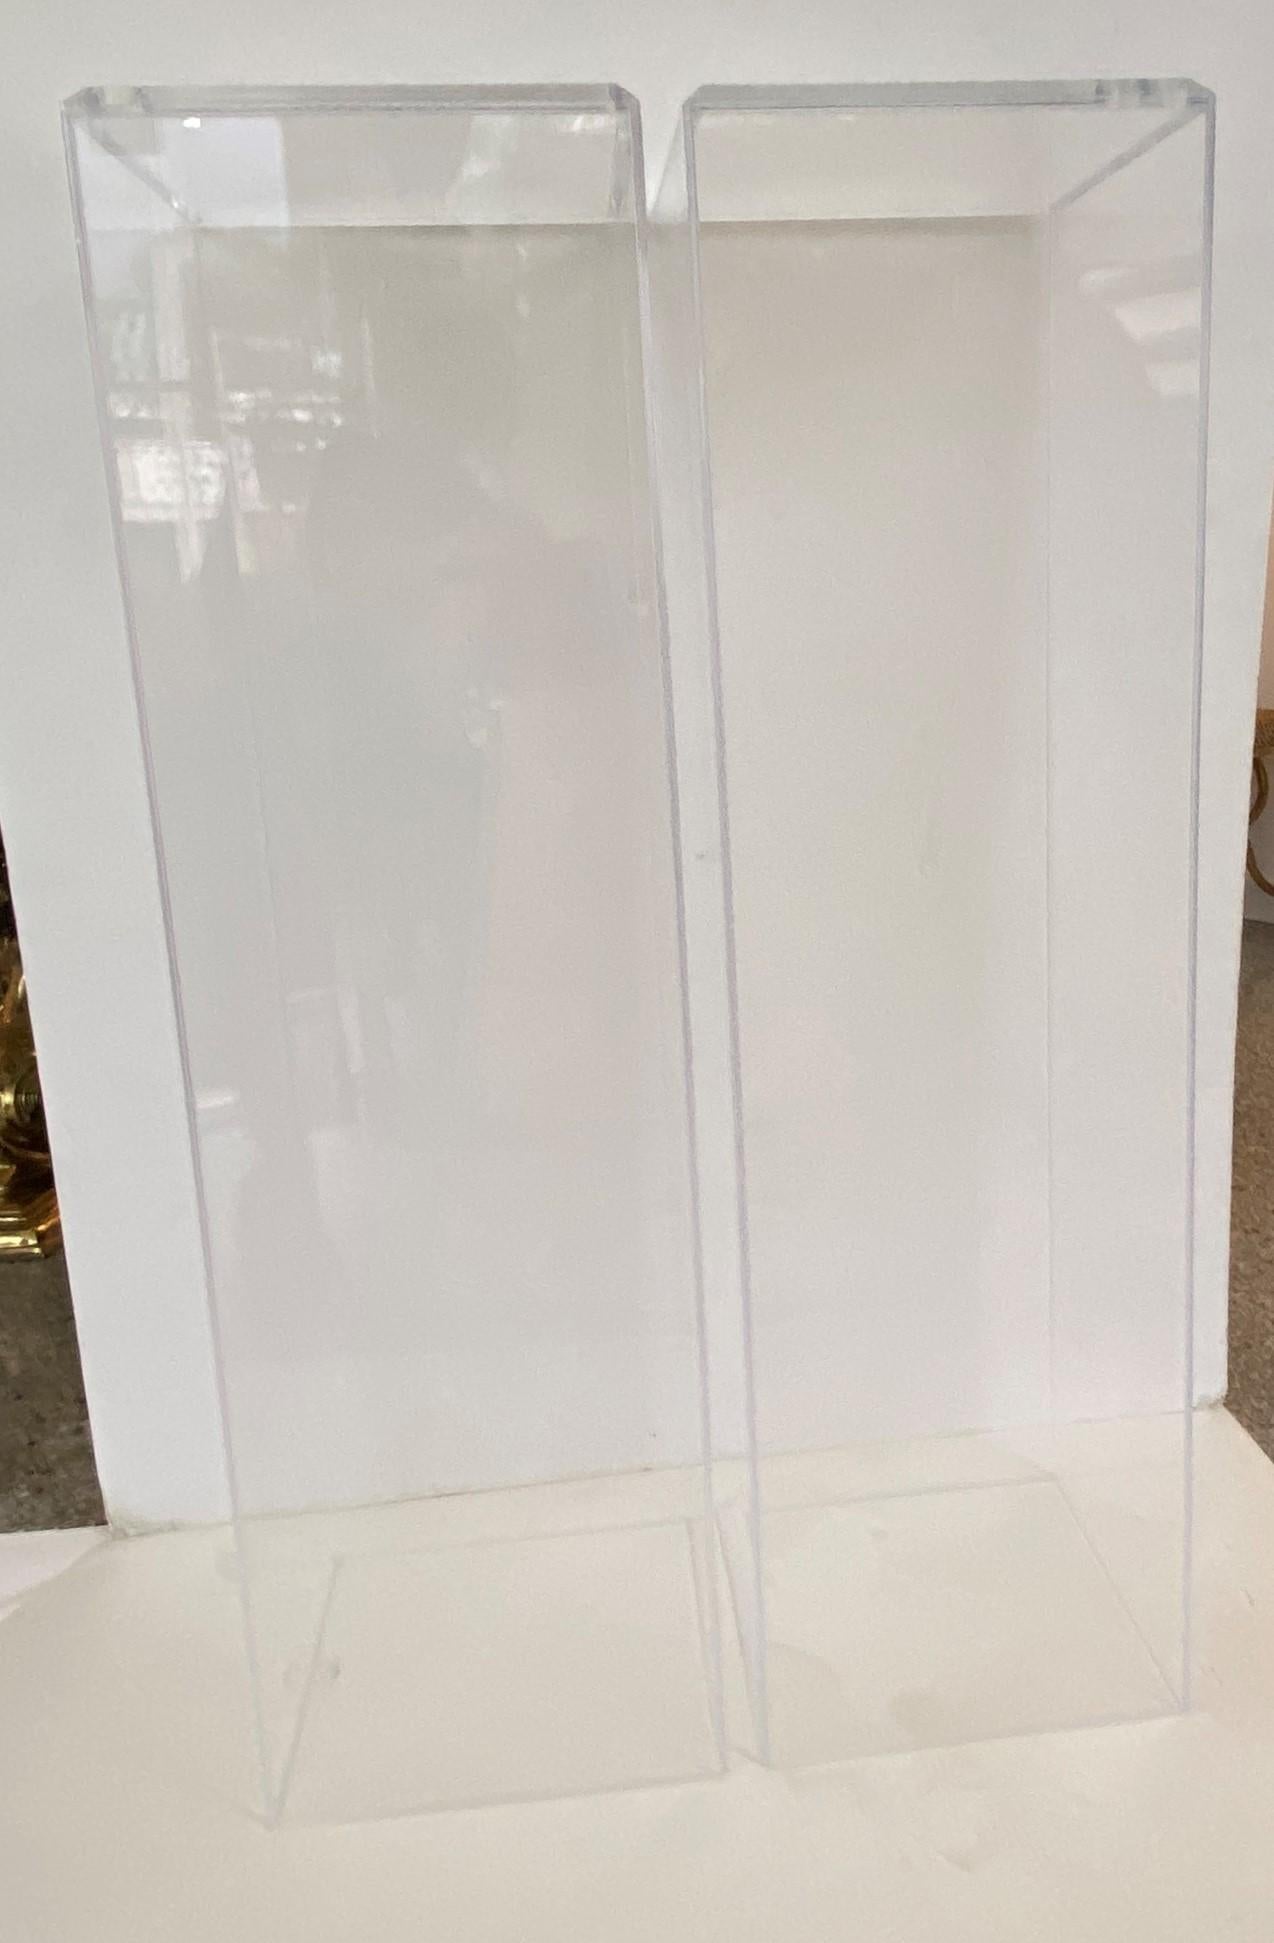 This stylish, clean-lined design for a pair of lucite pedestals will make the perfect perch for your artwork or sculpture.

Note: Top surface are measures 11.25 width x 11.25